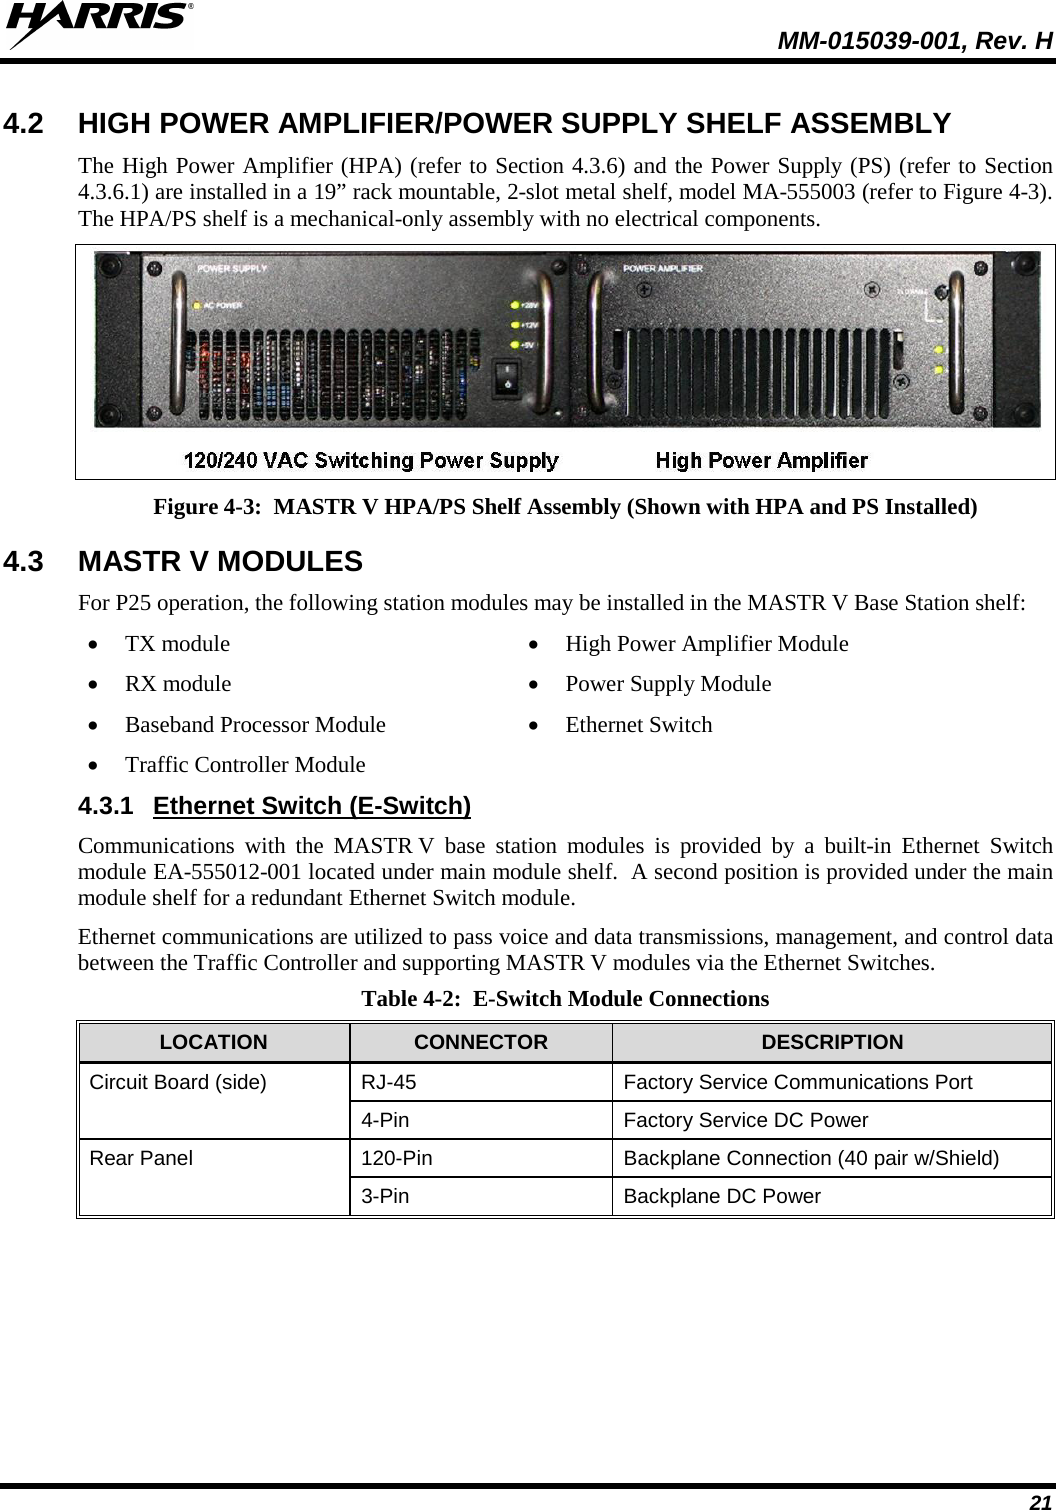   MM-015039-001, Rev. H 21 4.2 HIGH POWER AMPLIFIER/POWER SUPPLY SHELF ASSEMBLY The High Power Amplifier (HPA) (refer to Section 4.3.6) and the Power Supply (PS) (refer to Section 4.3.6.1) are installed in a 19” rack mountable, 2-slot metal shelf, model MA-555003 (refer to Figure 4-3).  The HPA/PS shelf is a mechanical-only assembly with no electrical components.  Figure 4-3:  MASTR V HPA/PS Shelf Assembly (Shown with HPA and PS Installed) 4.3 MASTR V MODULES For P25 operation, the following station modules may be installed in the MASTR V Base Station shelf: • TX module • RX module • Baseband Processor Module • Traffic Controller Module • High Power Amplifier Module • Power Supply Module • Ethernet Switch 4.3.1 Ethernet Switch (E-Switch) Communications with the MASTR V base station modules is provided by a built-in Ethernet Switch module EA-555012-001 located under main module shelf.  A second position is provided under the main module shelf for a redundant Ethernet Switch module. Ethernet communications are utilized to pass voice and data transmissions, management, and control data between the Traffic Controller and supporting MASTR V modules via the Ethernet Switches.   Table 4-2:  E-Switch Module Connections LOCATION CONNECTOR  DESCRIPTION Circuit Board (side) RJ-45 Factory Service Communications Port 4-Pin Factory Service DC Power  Rear Panel 120-Pin Backplane Connection (40 pair w/Shield) 3-Pin Backplane DC Power  